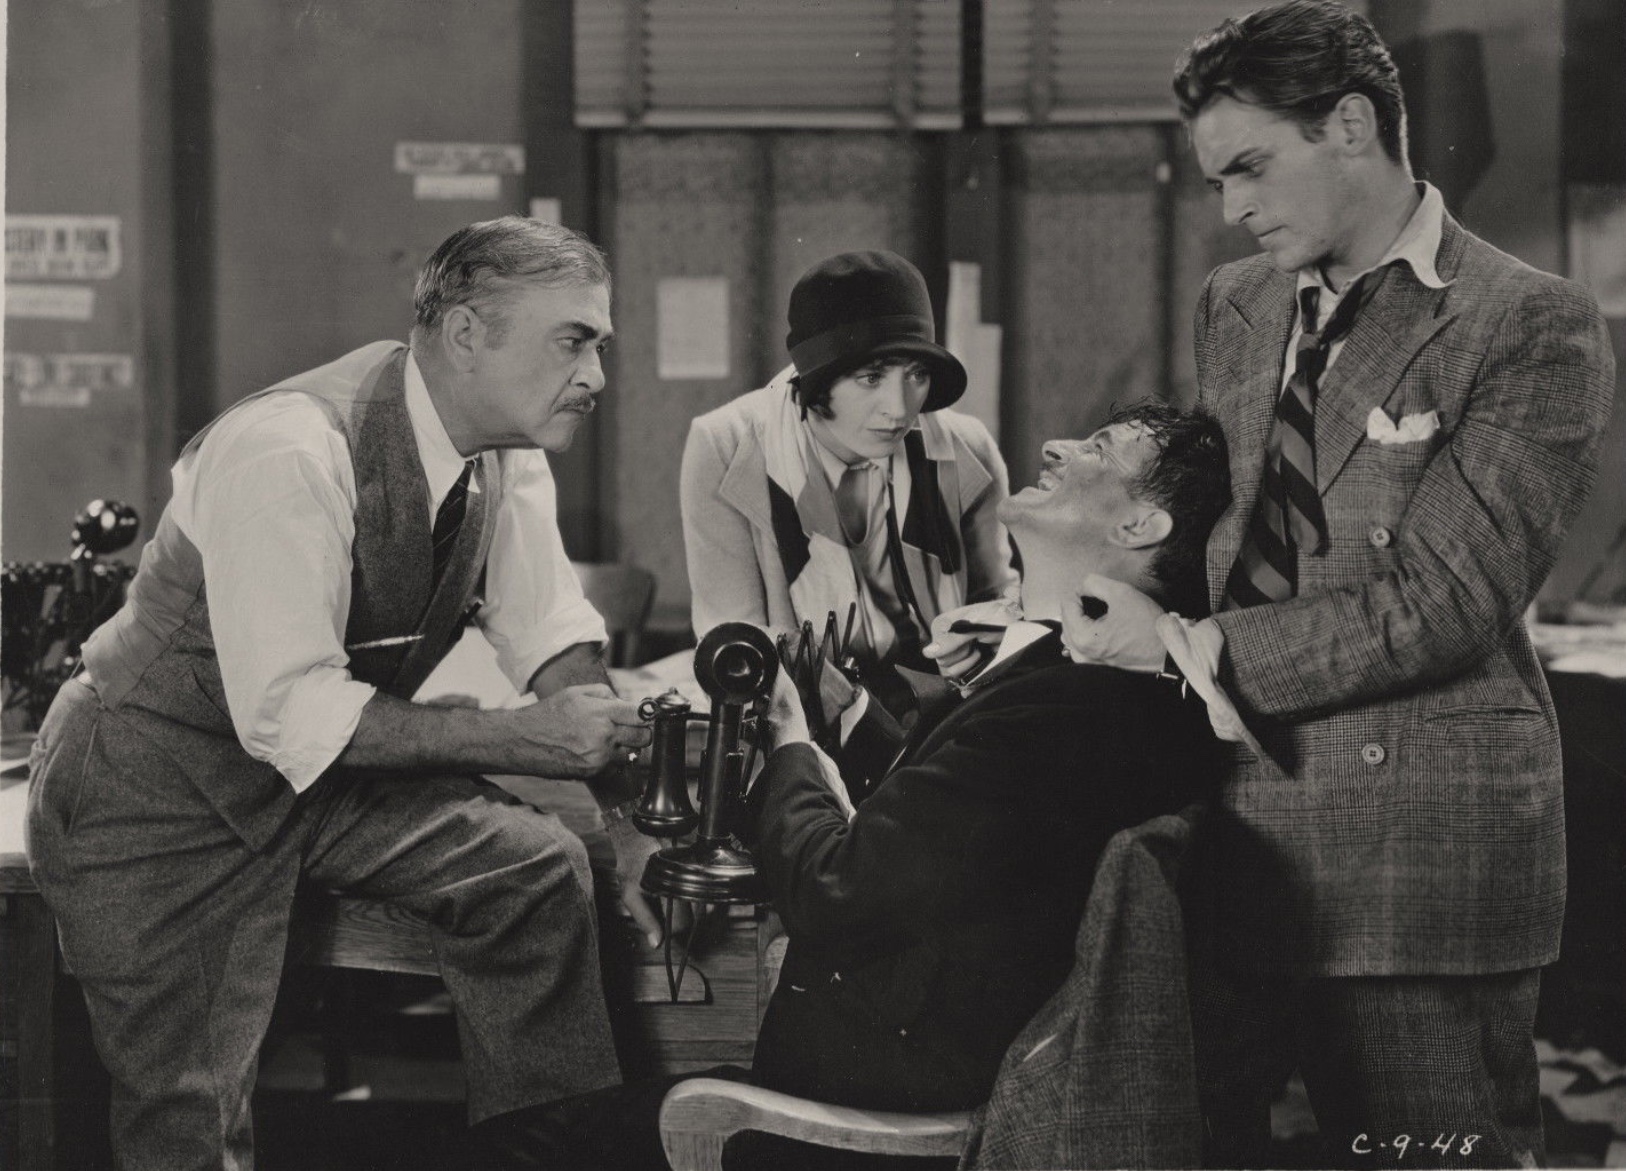 The Power of the Press (1928) Screenshot 4 